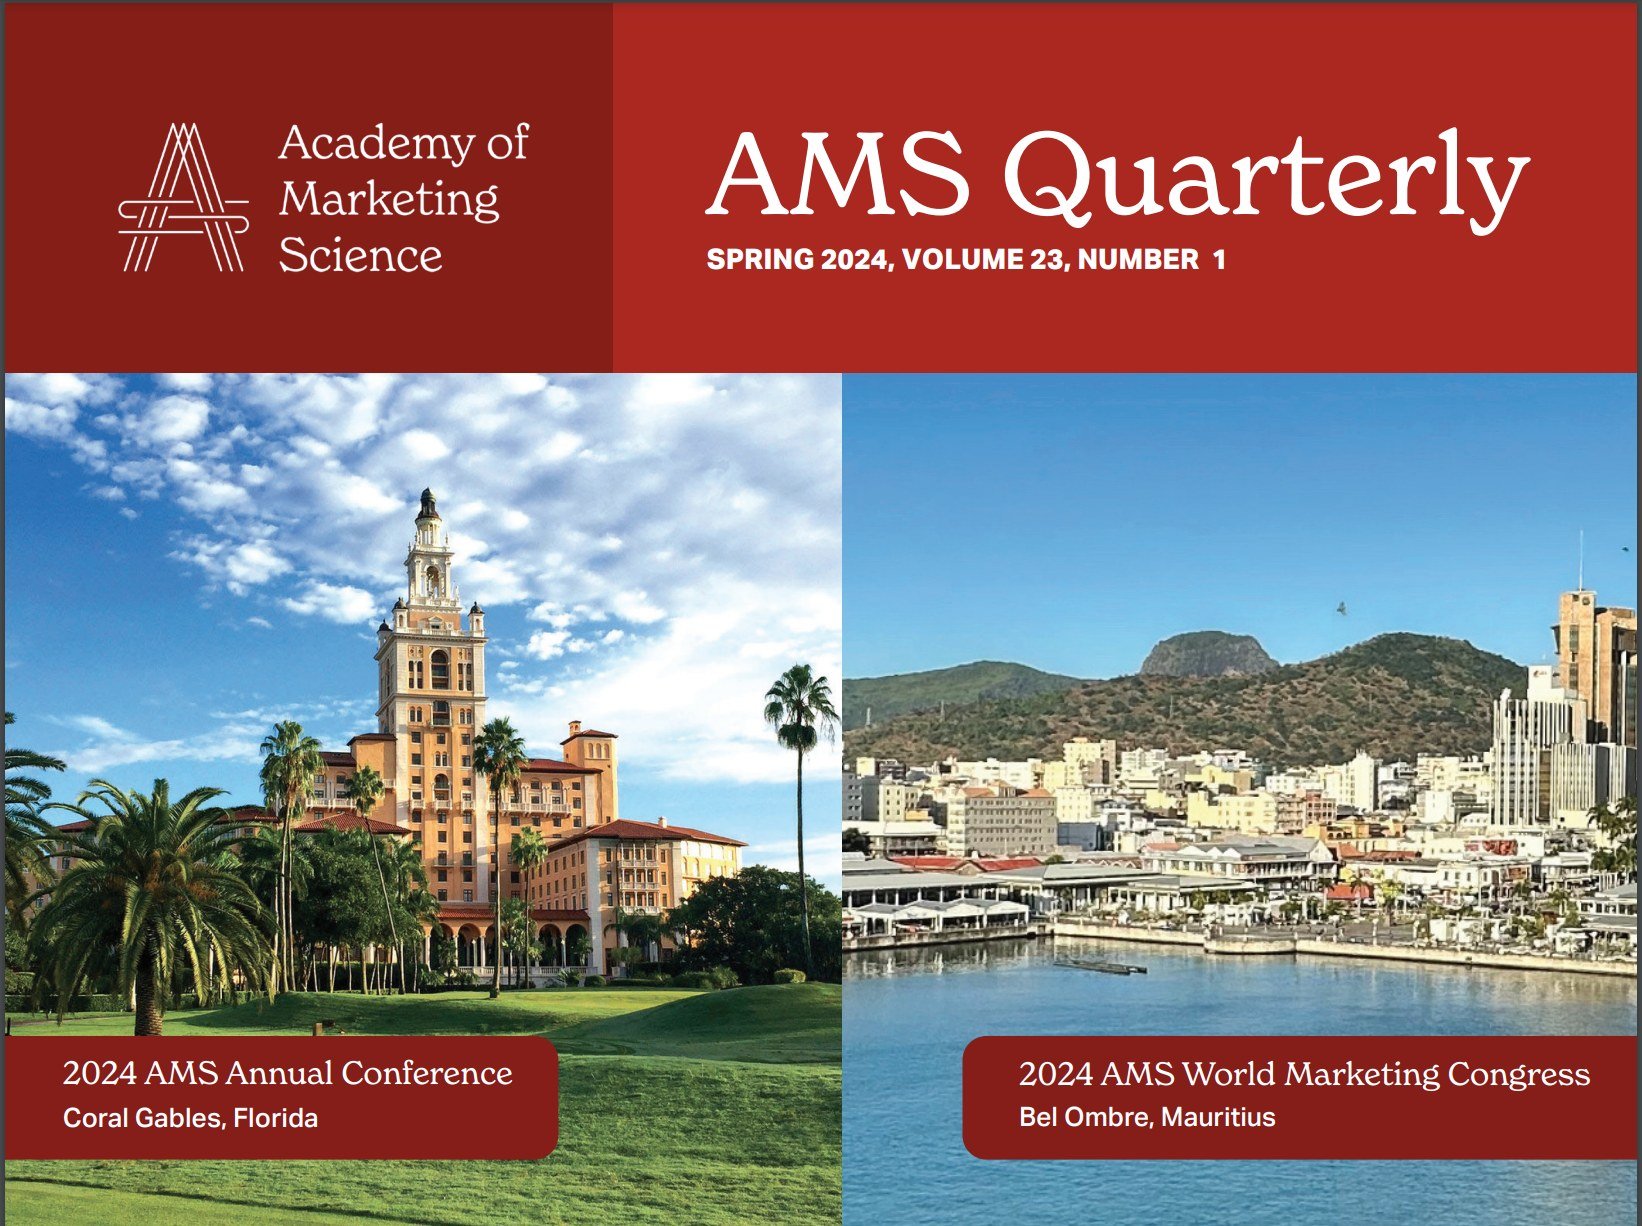 📢 The AMS Quarterly Spring 2024 issue is out: https://www.ams-web.org/s/AMS-Spring-2024-FINAL.pdf A big thank you to everyone who contributed to this issue. We look forward to seeing you at one of the upcoming AMS conferences soon! 📆